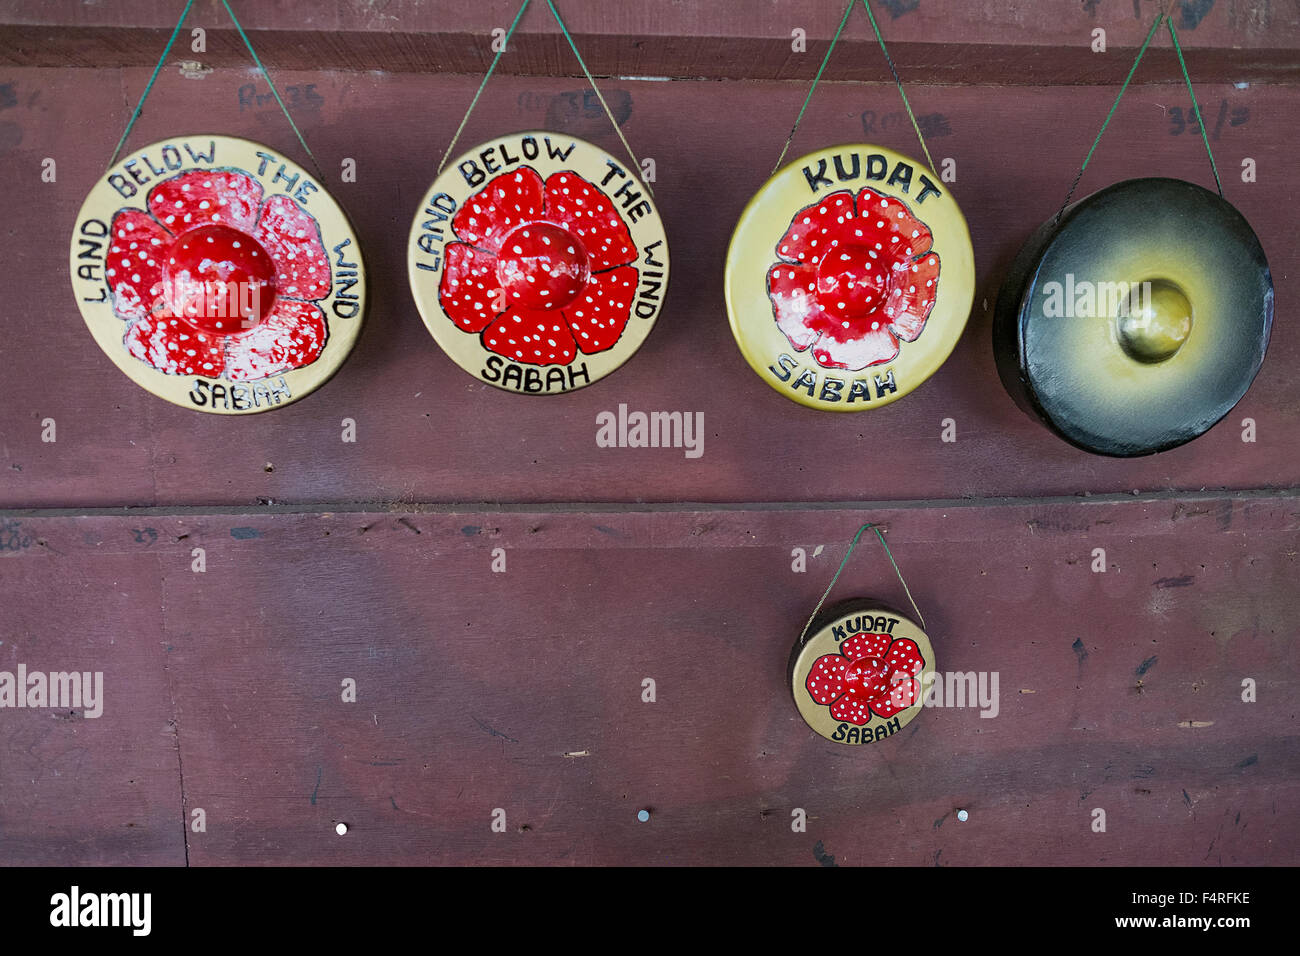 Traditional gongs for sale on display during Sunday market at the village in Kudat Sabah, Borneo, Malaysia Stock Photo